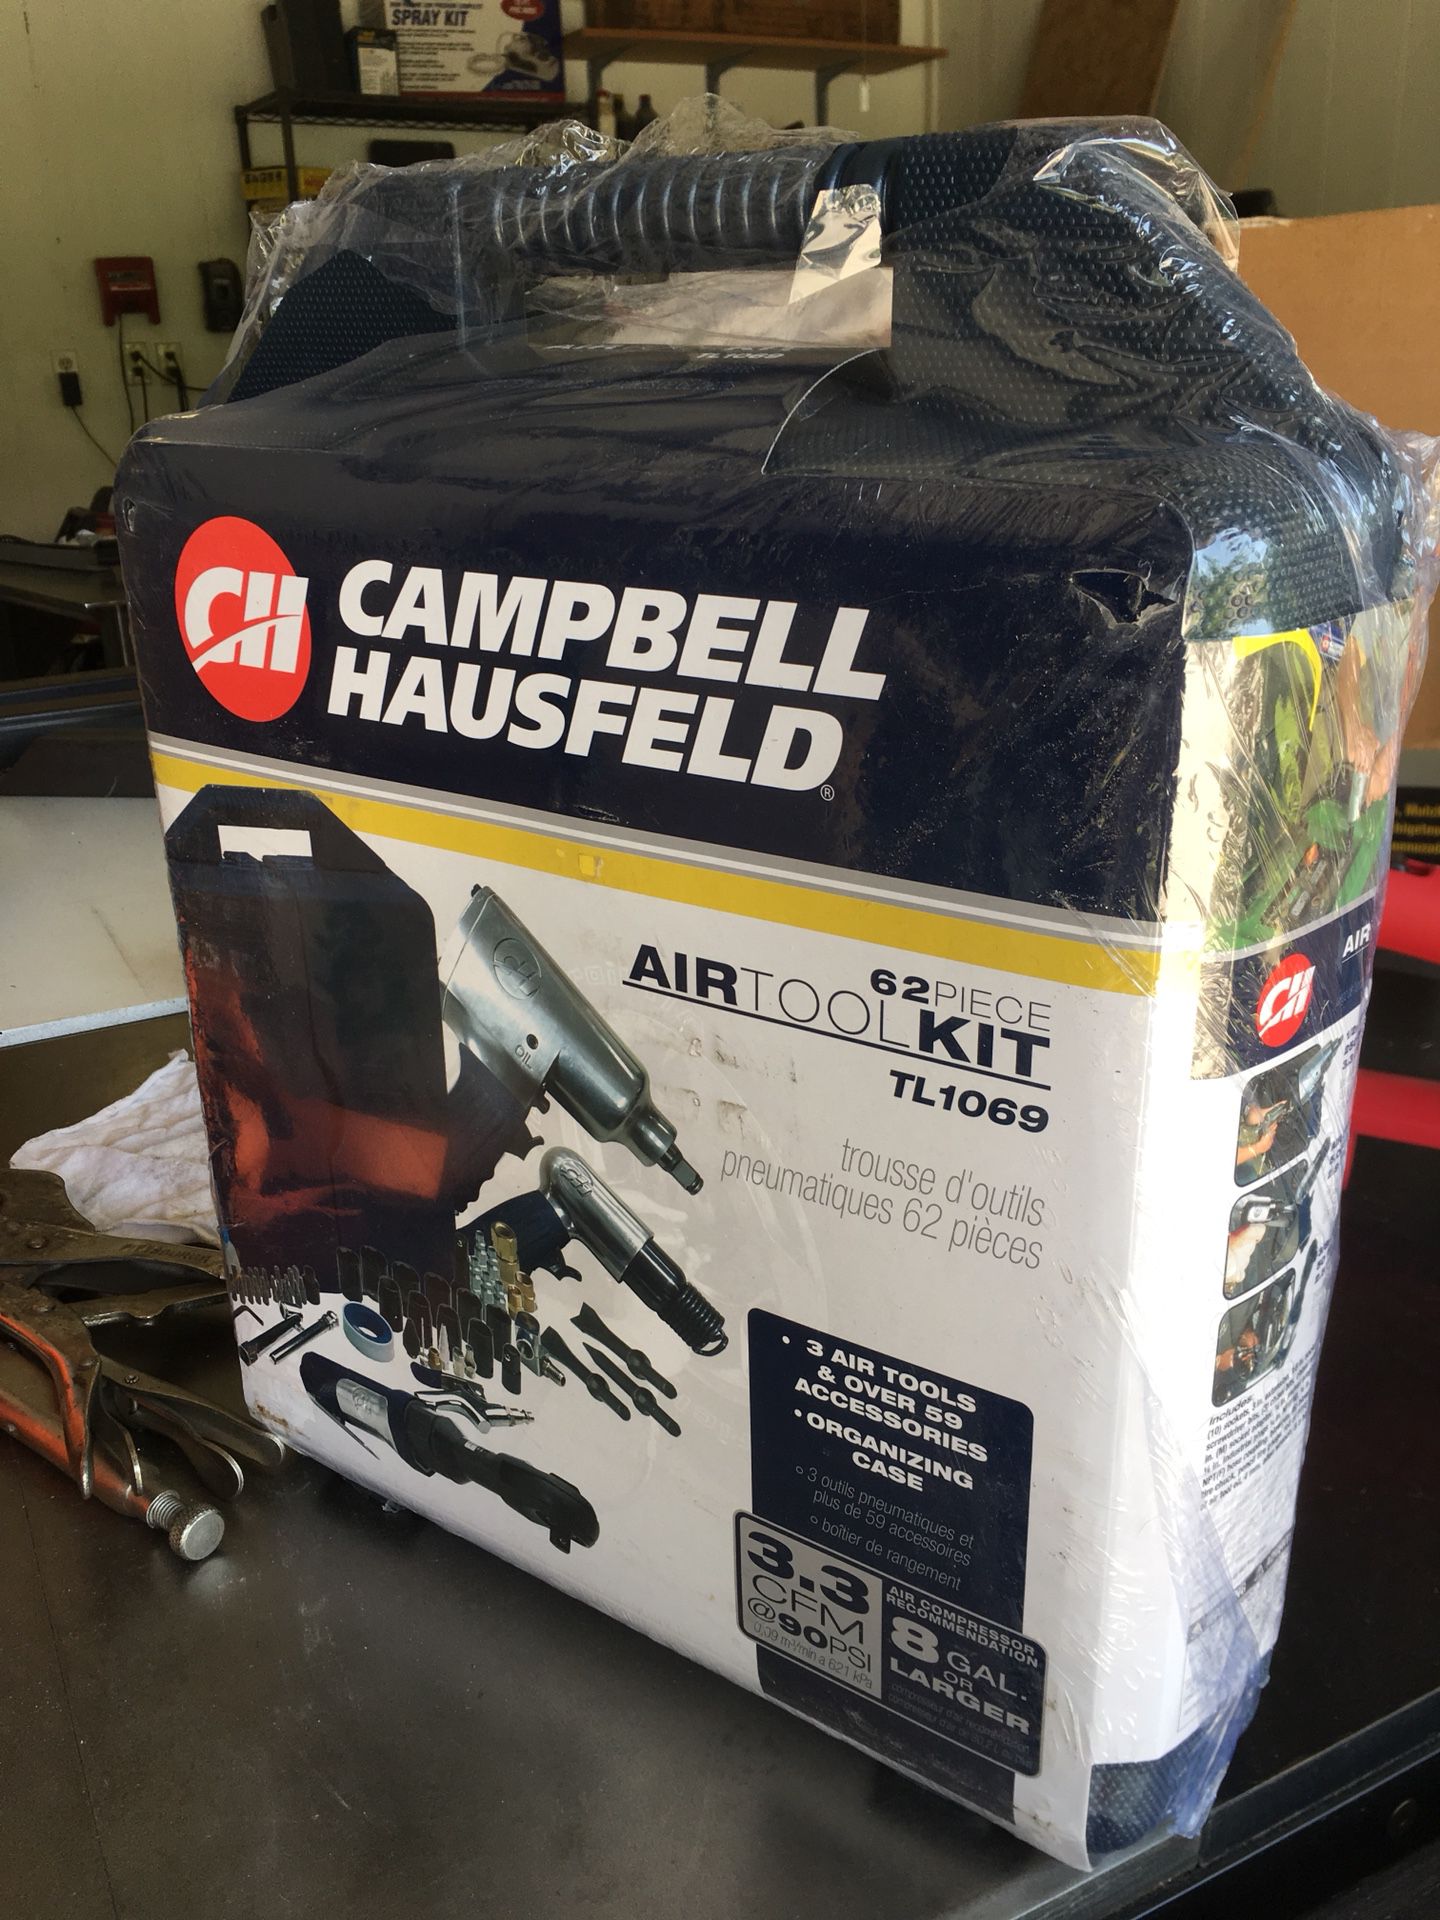 Brand new never opened Campbell Hausfeld 62-piece air tool kit